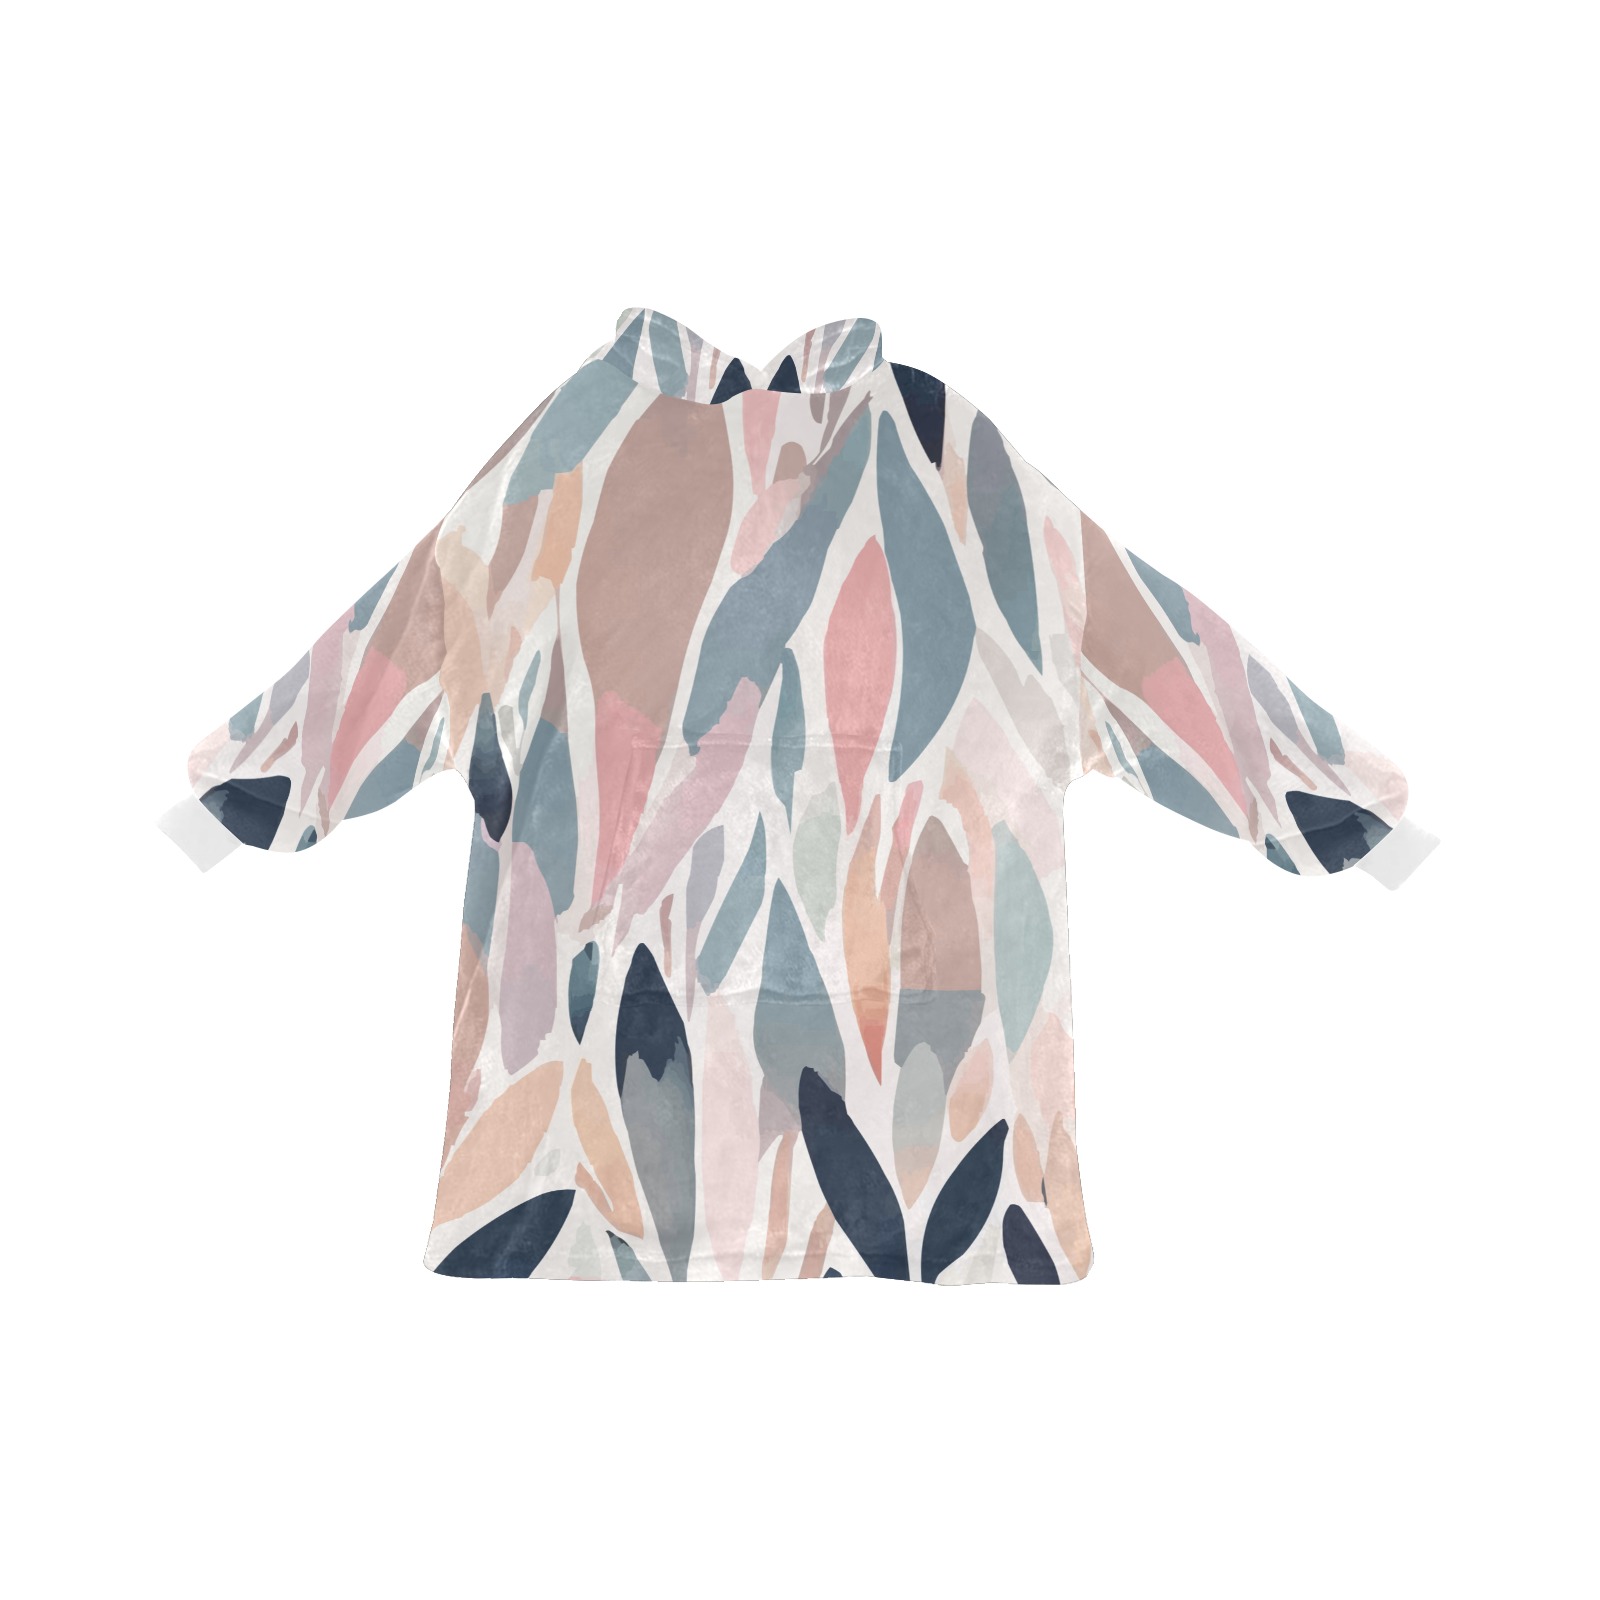 Stylish abstract shapes of pink, blue, gray colors Blanket Hoodie for Women